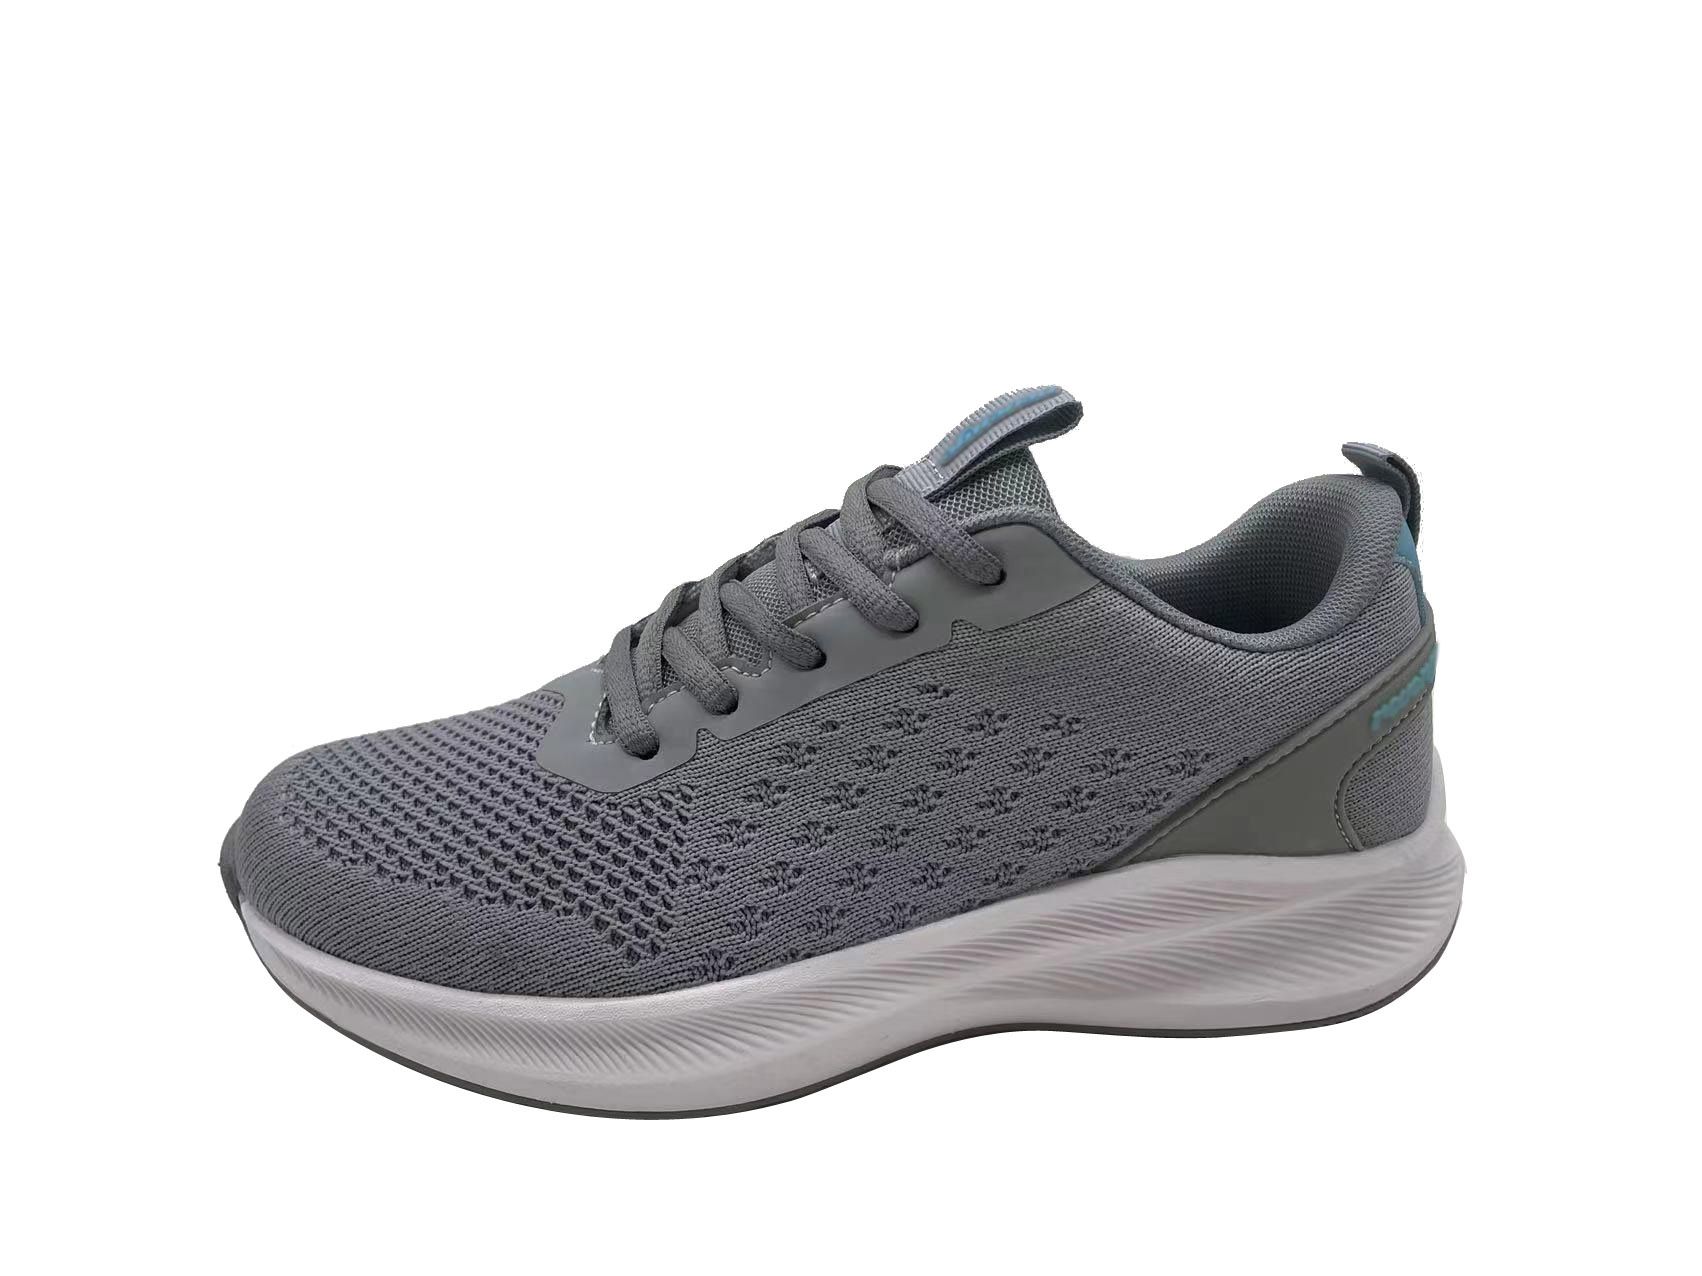 Women's fashion sneaker, with flyknit upper and eva outsole, light weight and comfortable Manufacturers, Women's fashion sneaker, with flyknit upper and eva outsole, light weight and comfortable Factory, Supply Women's fashion sneaker, with flyknit upper and eva outsole, light weight and comfortable